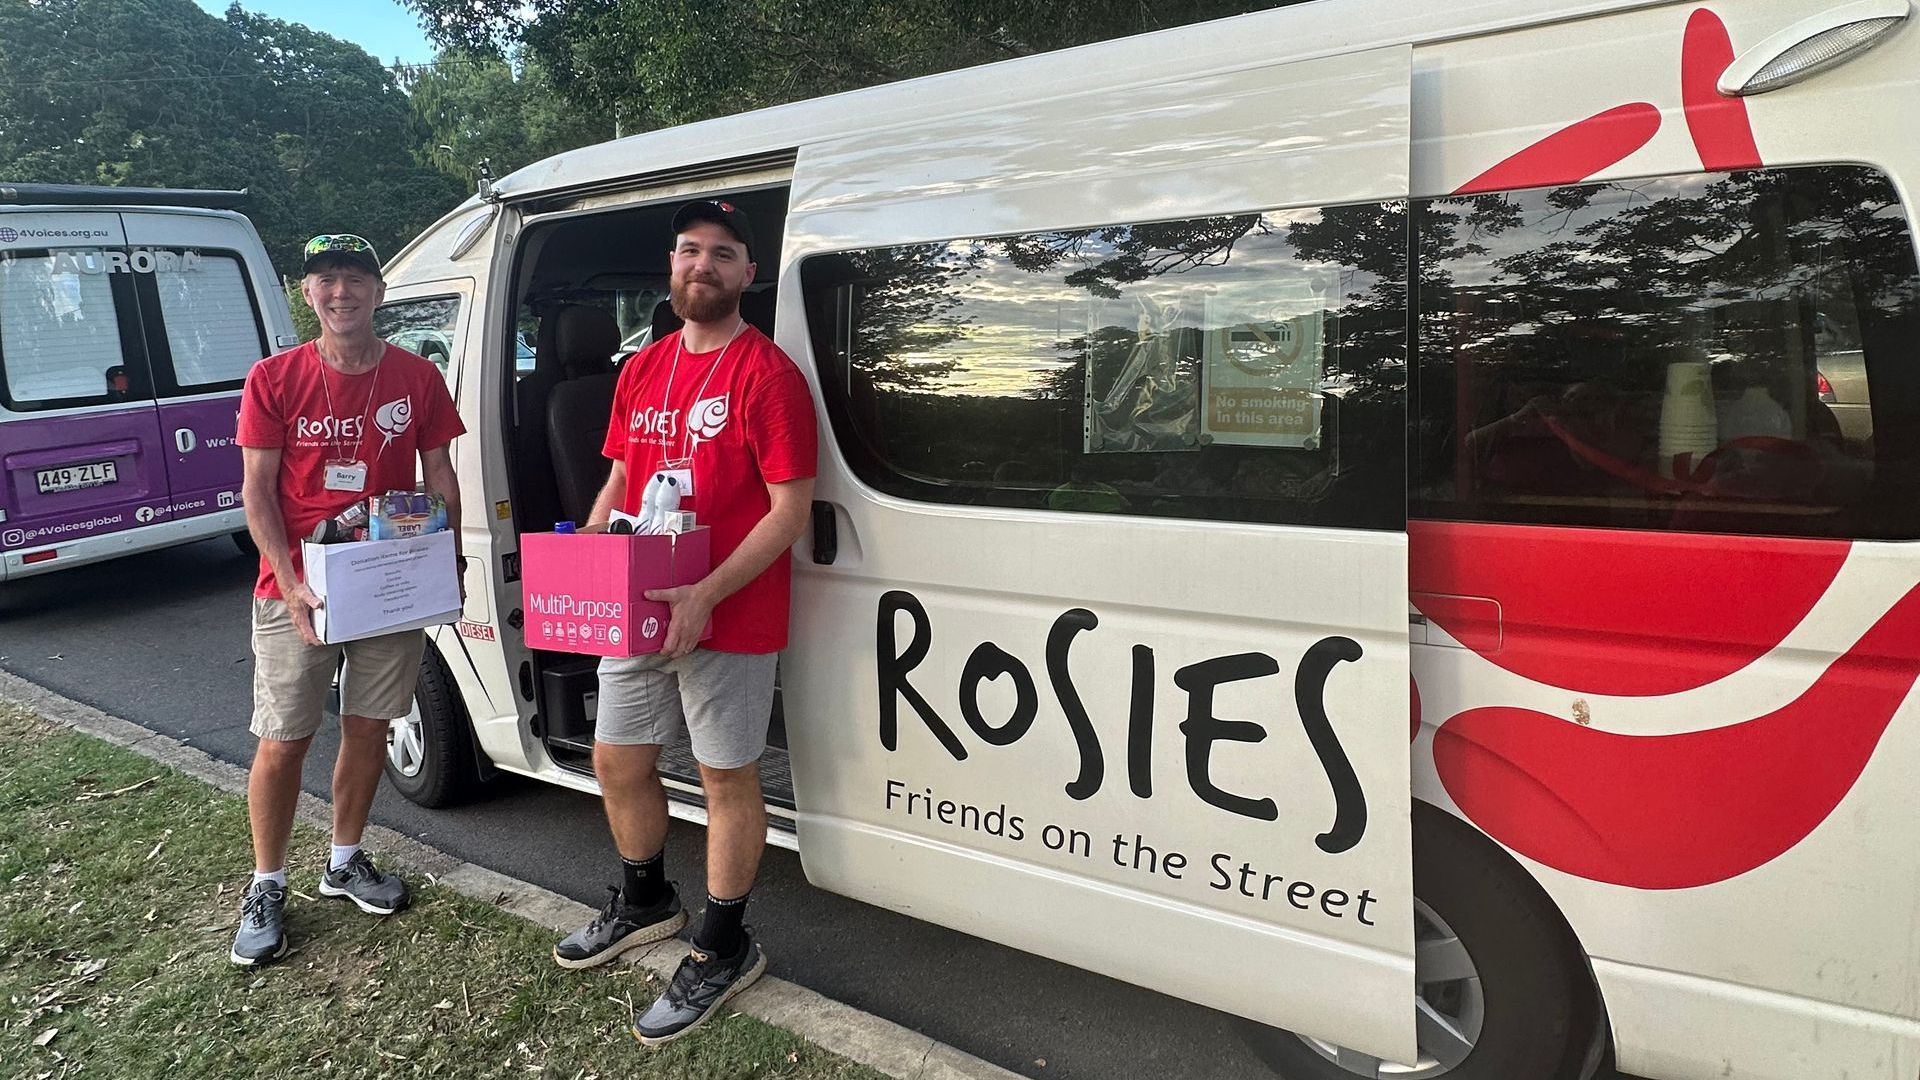 Two men are standing next to a white van that says rosies on the side.